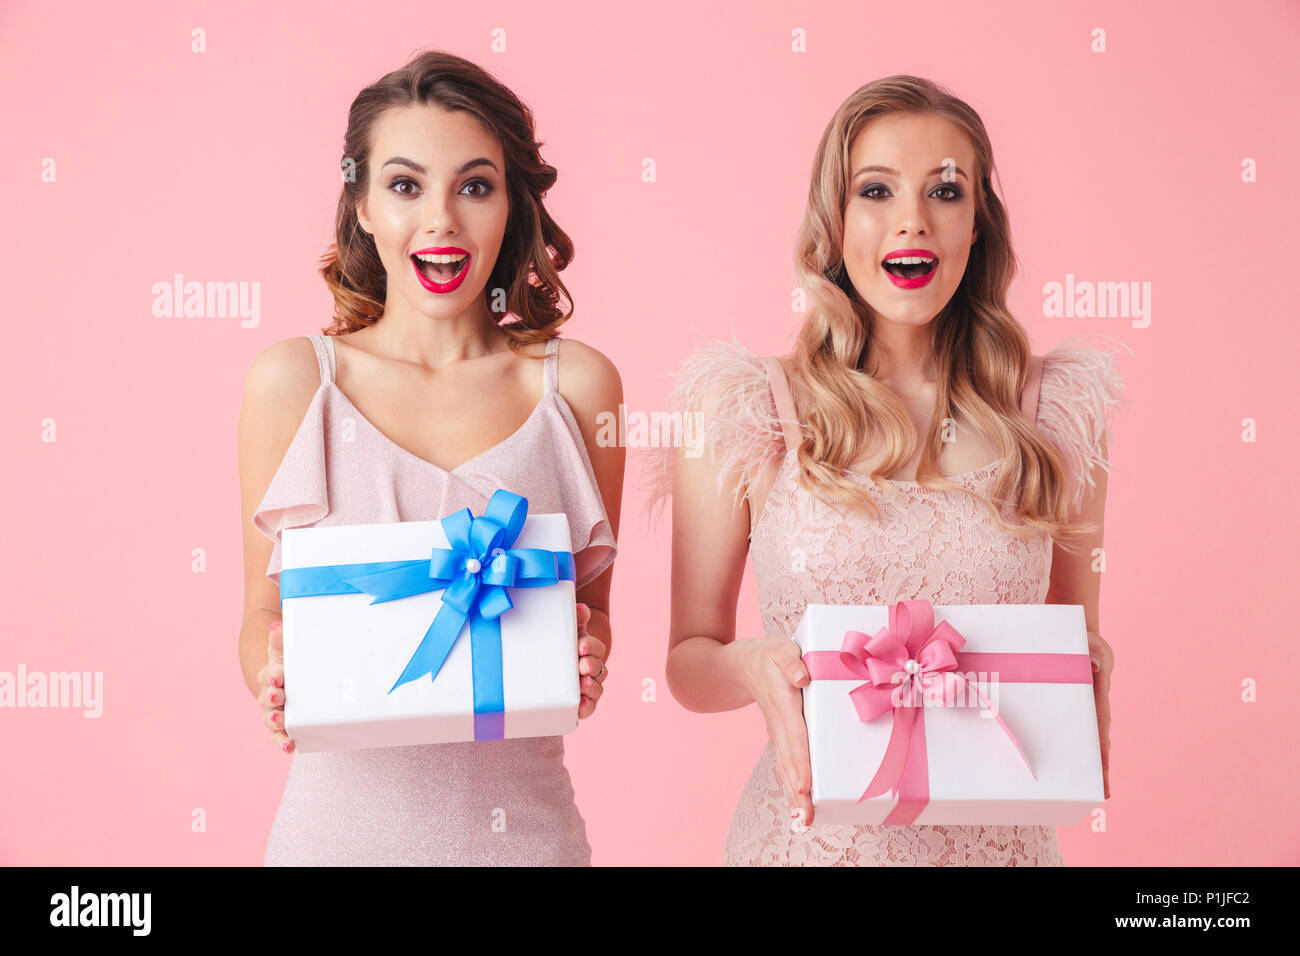 Two surprised happy women in dresses holding gift boxes and looking at the camera over pink background Stock Photo